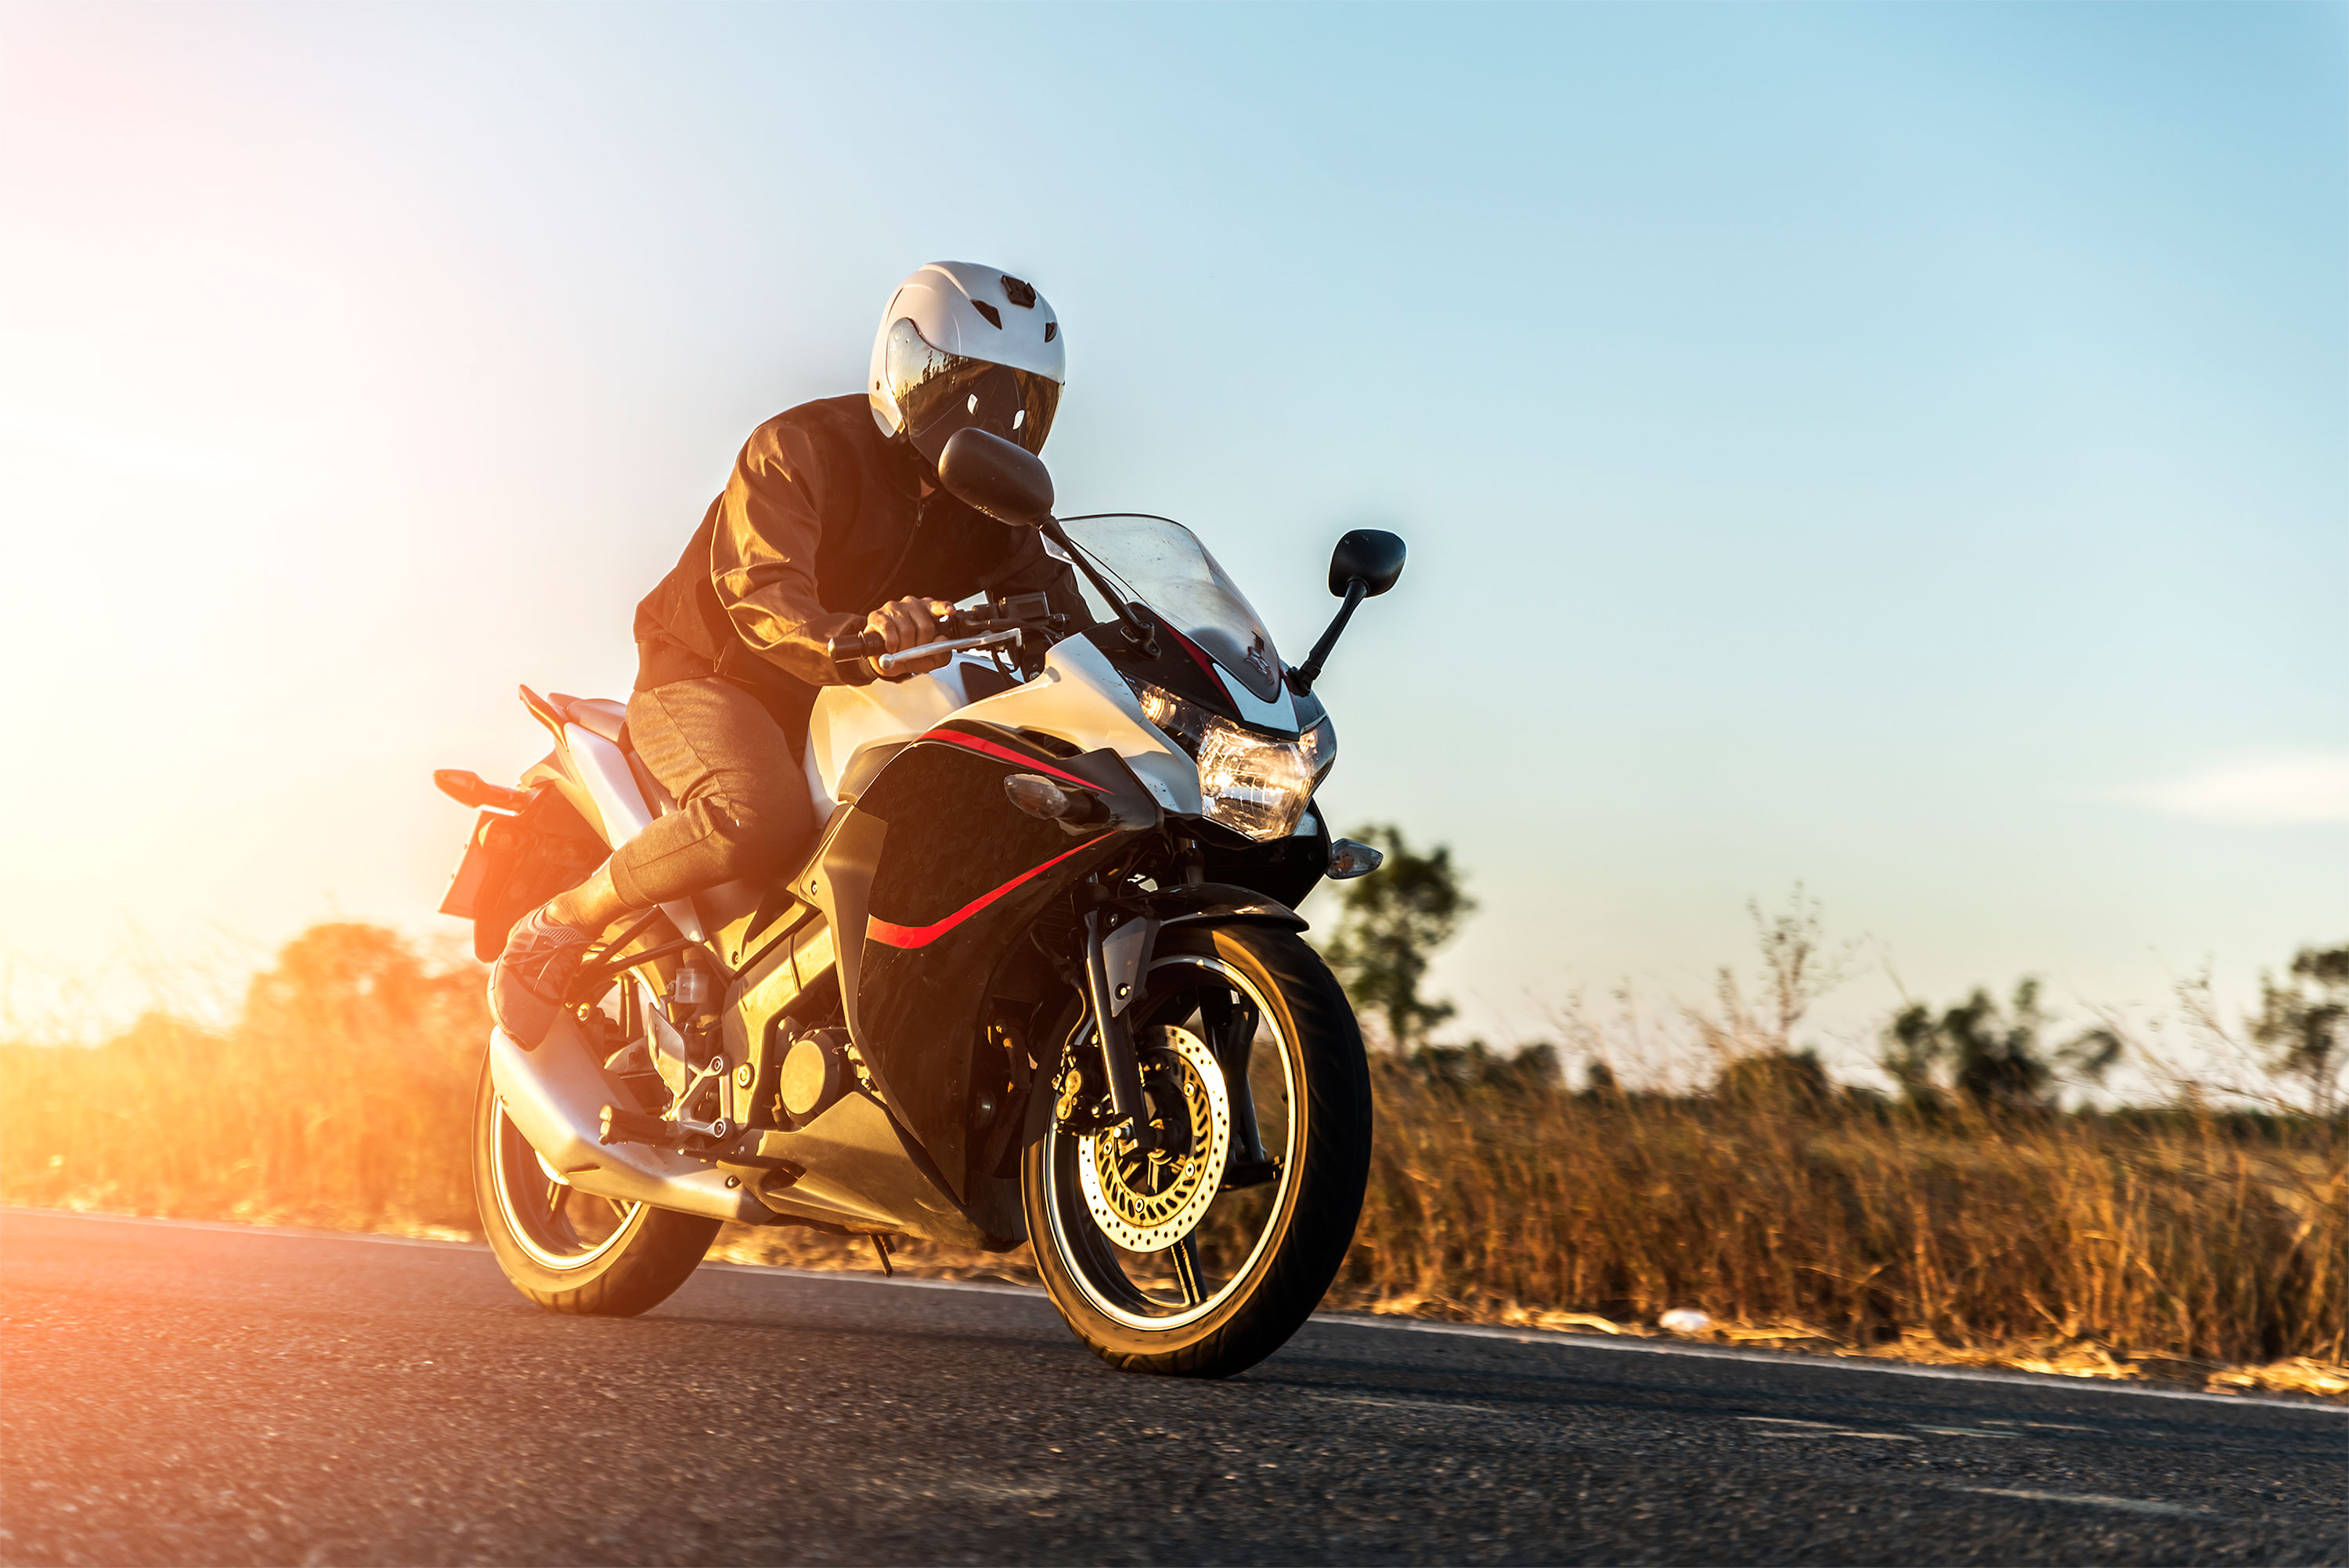 How to claim two-wheeler insurance?